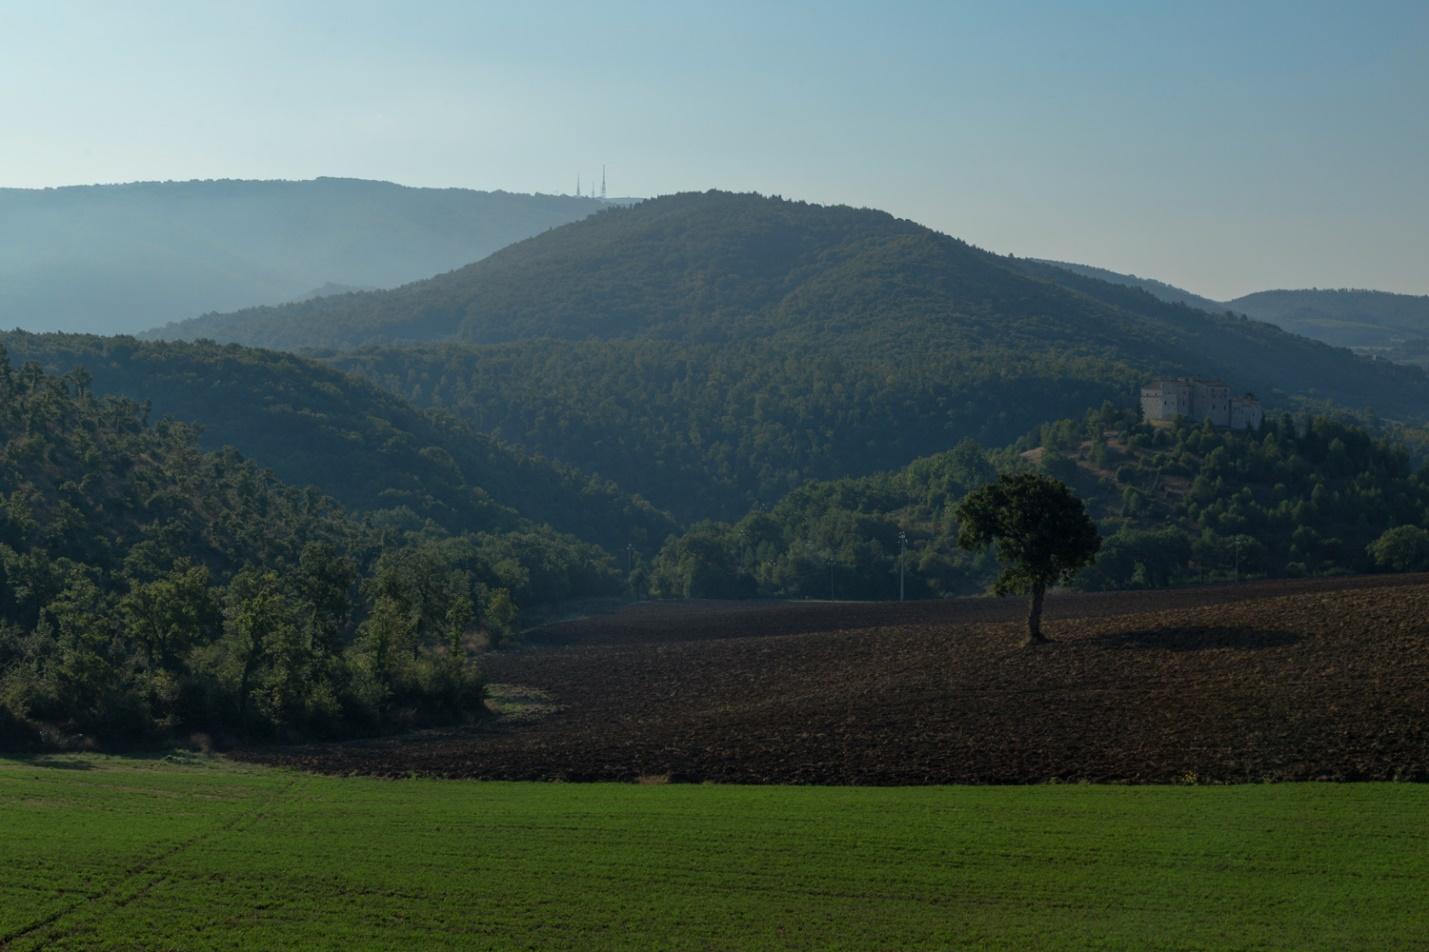 The rolling hills of Umbria.